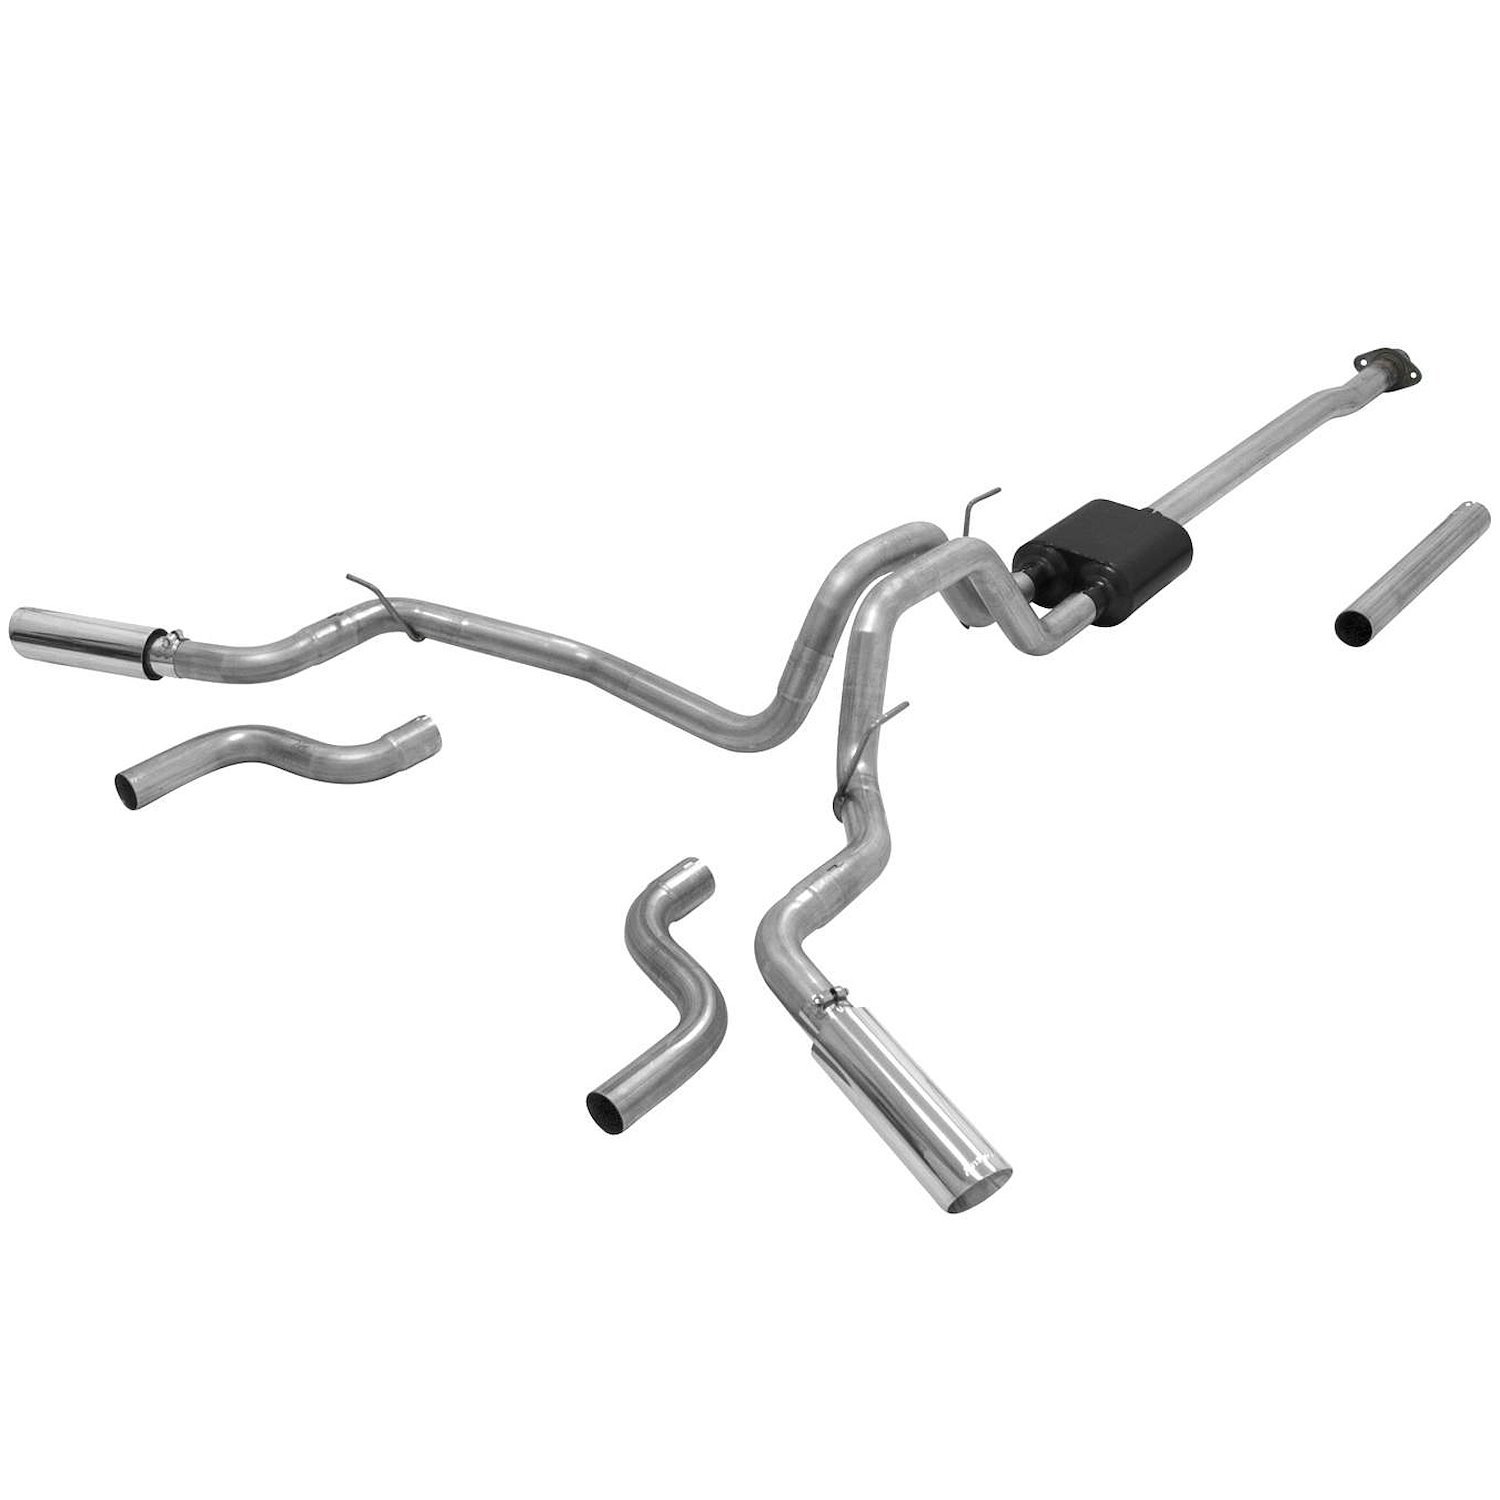 American Thunder Cat-Back Exhaust System 2015-19 Ford F-150 2.7L/3.5L EcoBoost 3.5L TiVCT or 5.0L